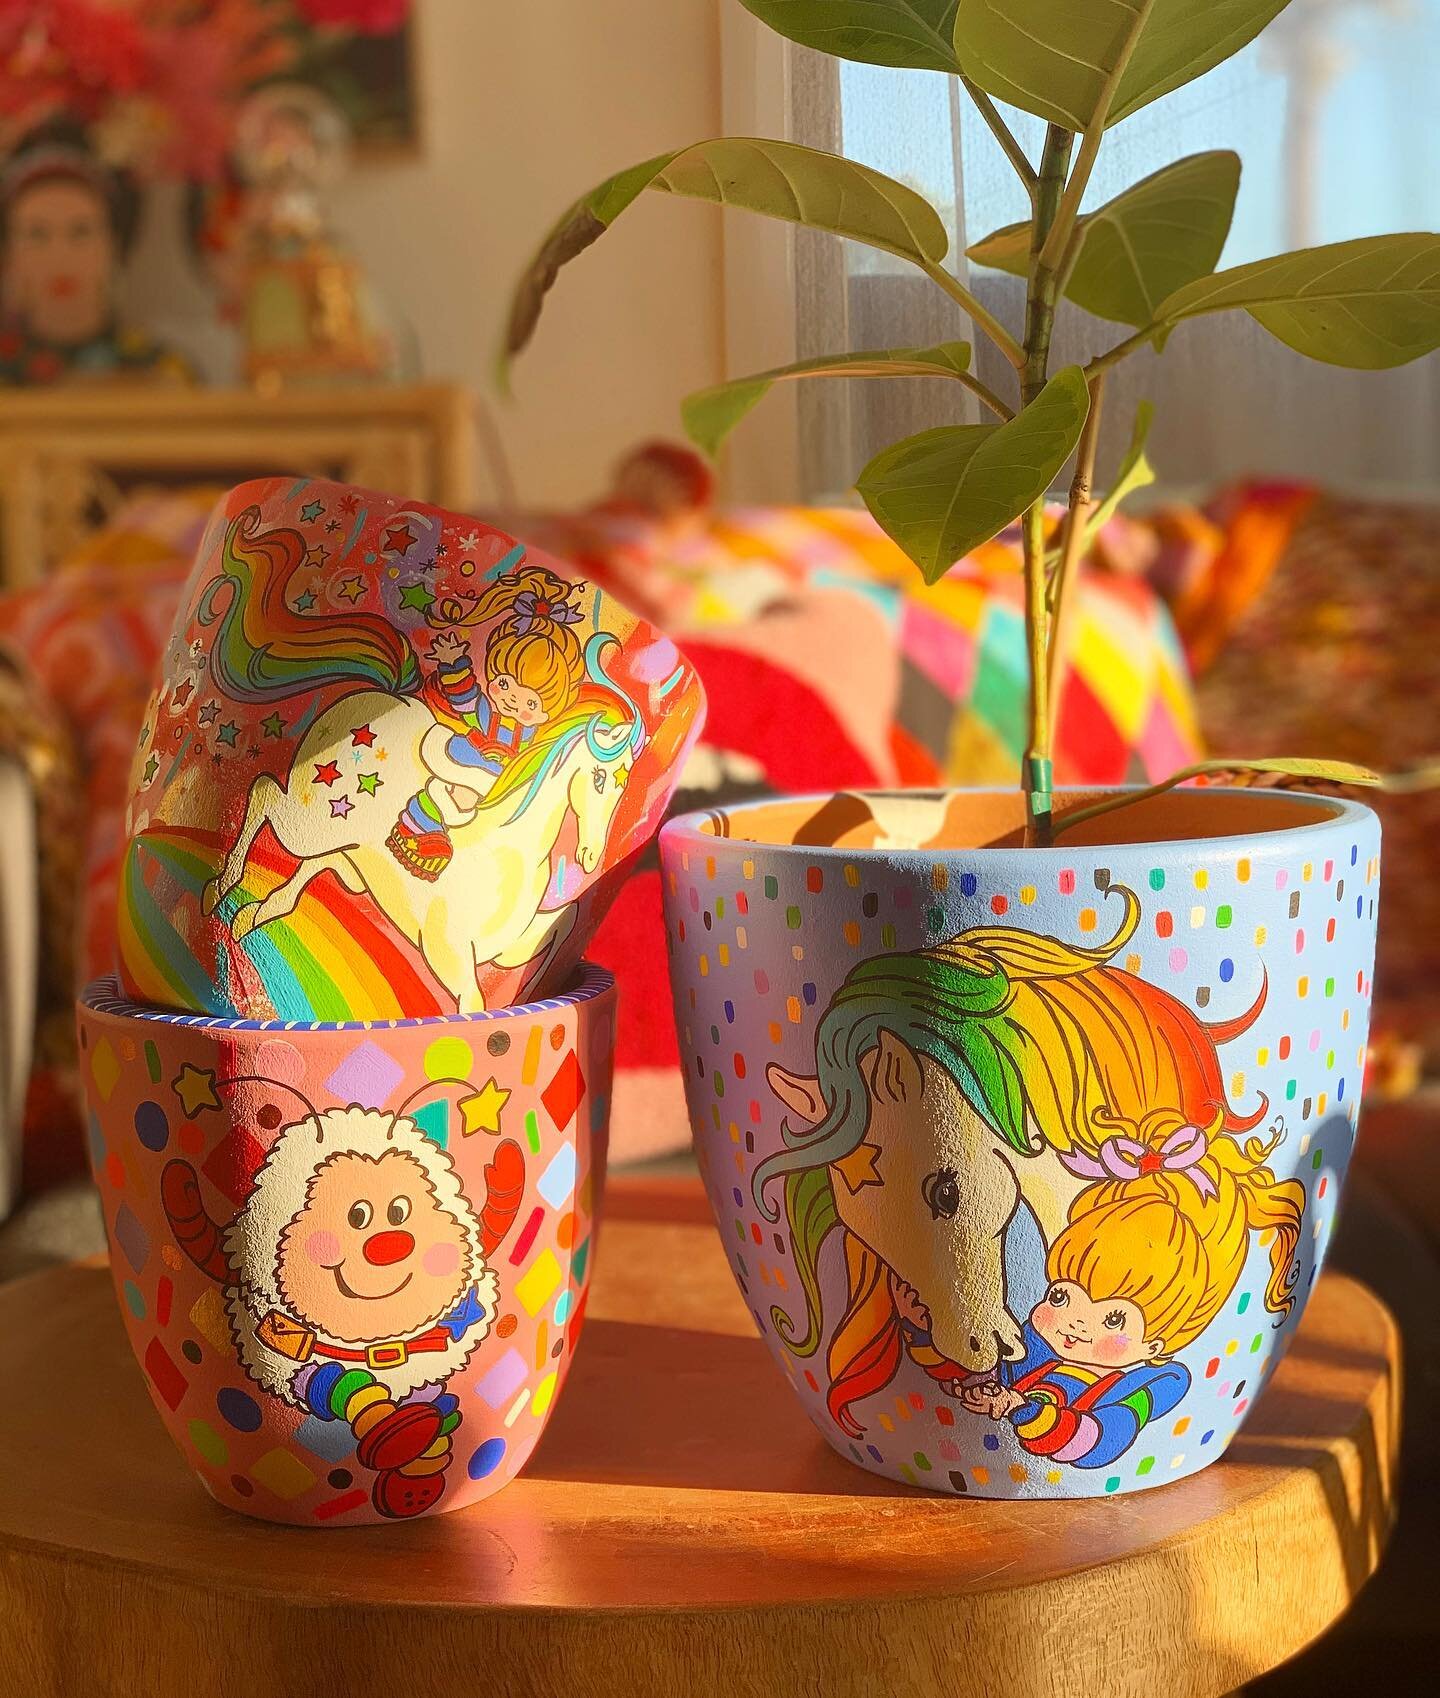 Oh hai, Goodmorning ☺️🌞 just caught this morning moment of golden sun and grabbed these &ldquo;work in progress&rdquo; pots for a photo ☺️☺️ More of these 80s nostalgic fan pots #comingsoon 🙃.. (i *may* have suggested it would be this weekend... bu